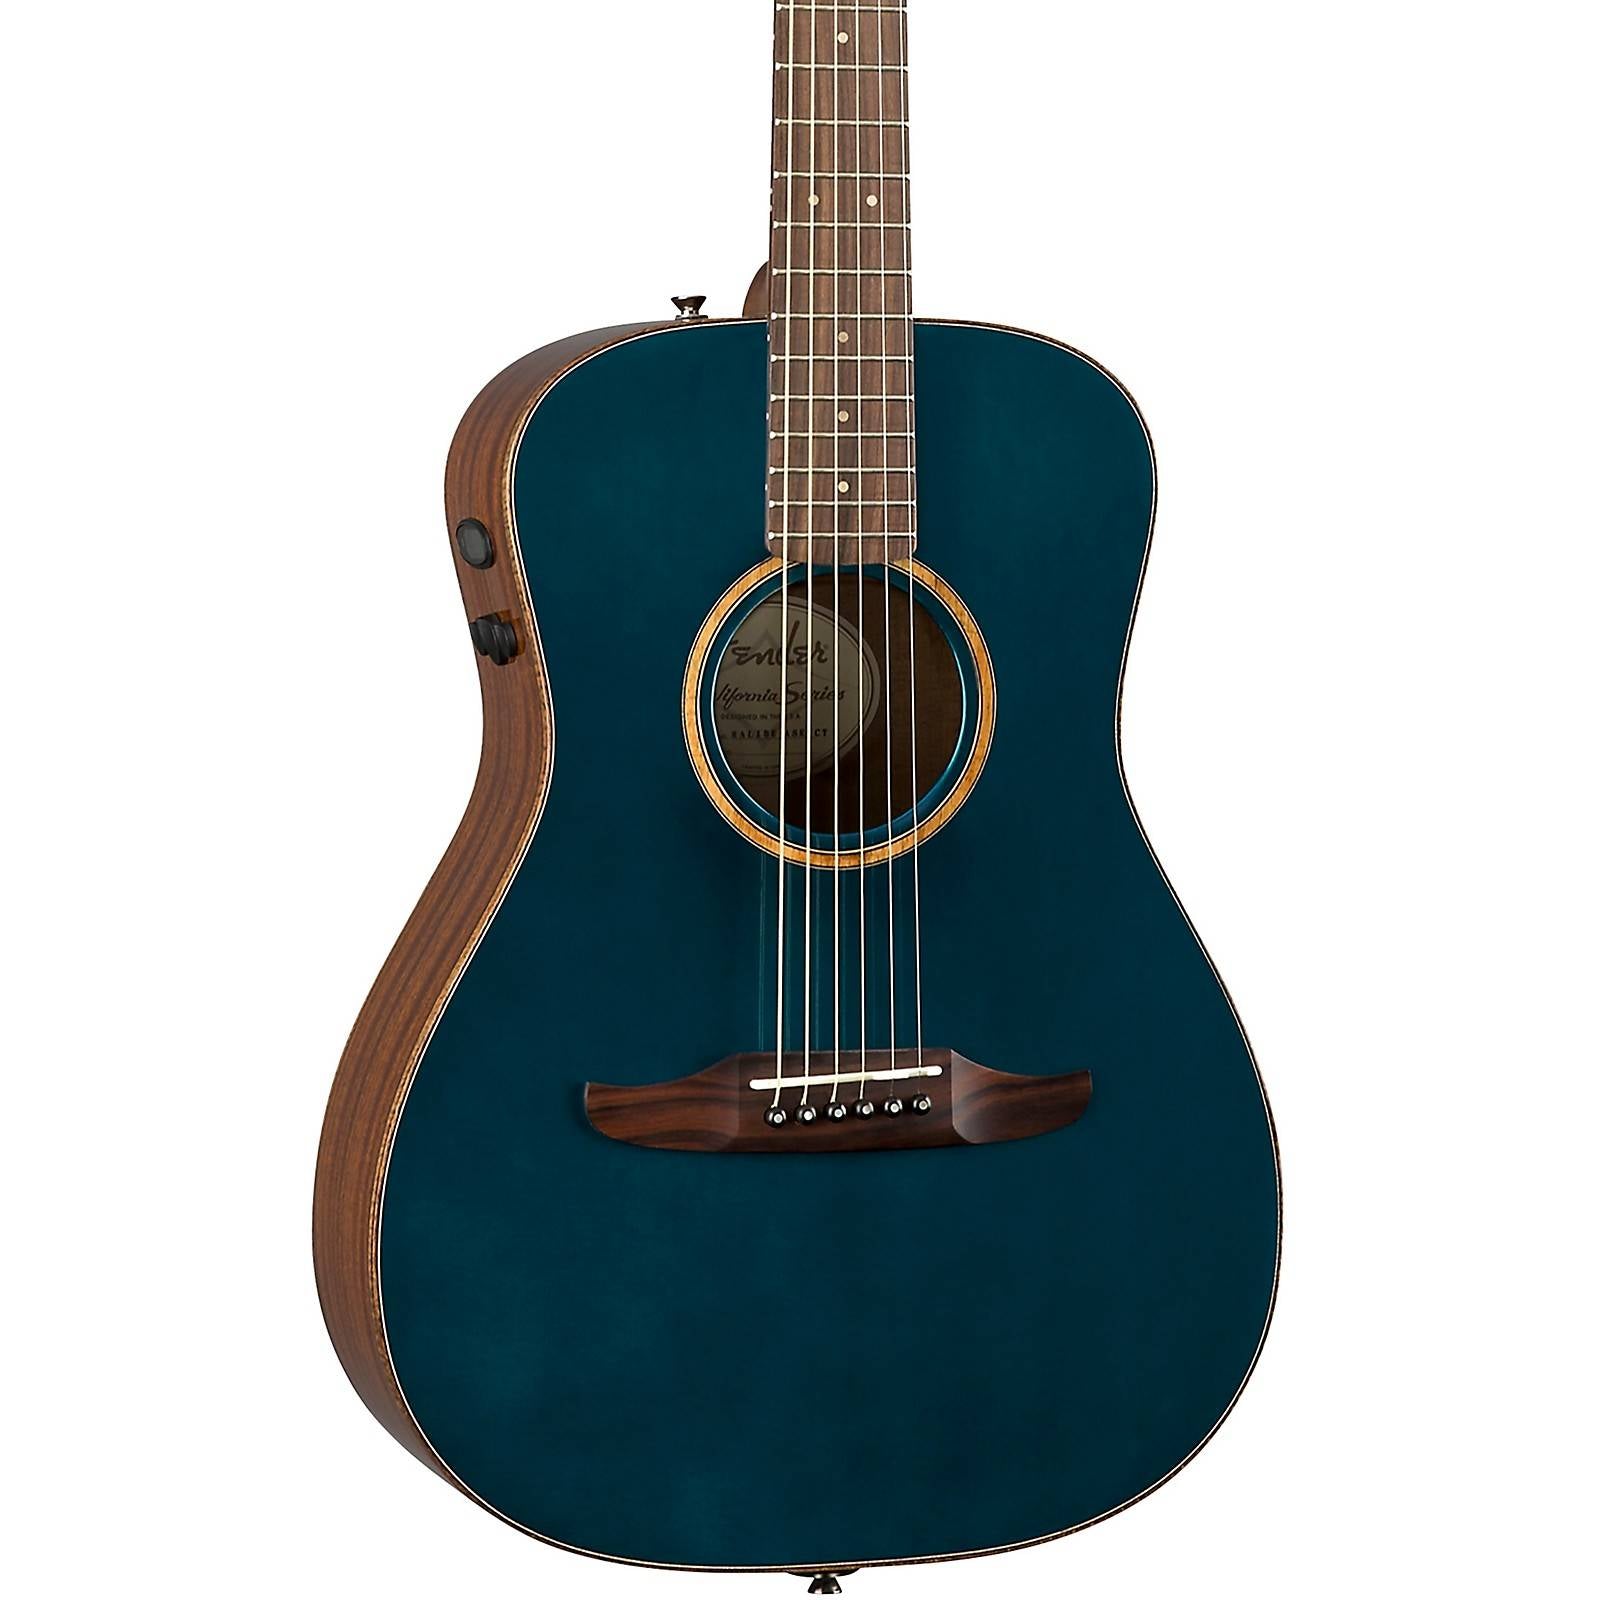 Fender Malibu Classic Small-Bodied Acoustic Guitar w/Bag, Cosmic Turquoise